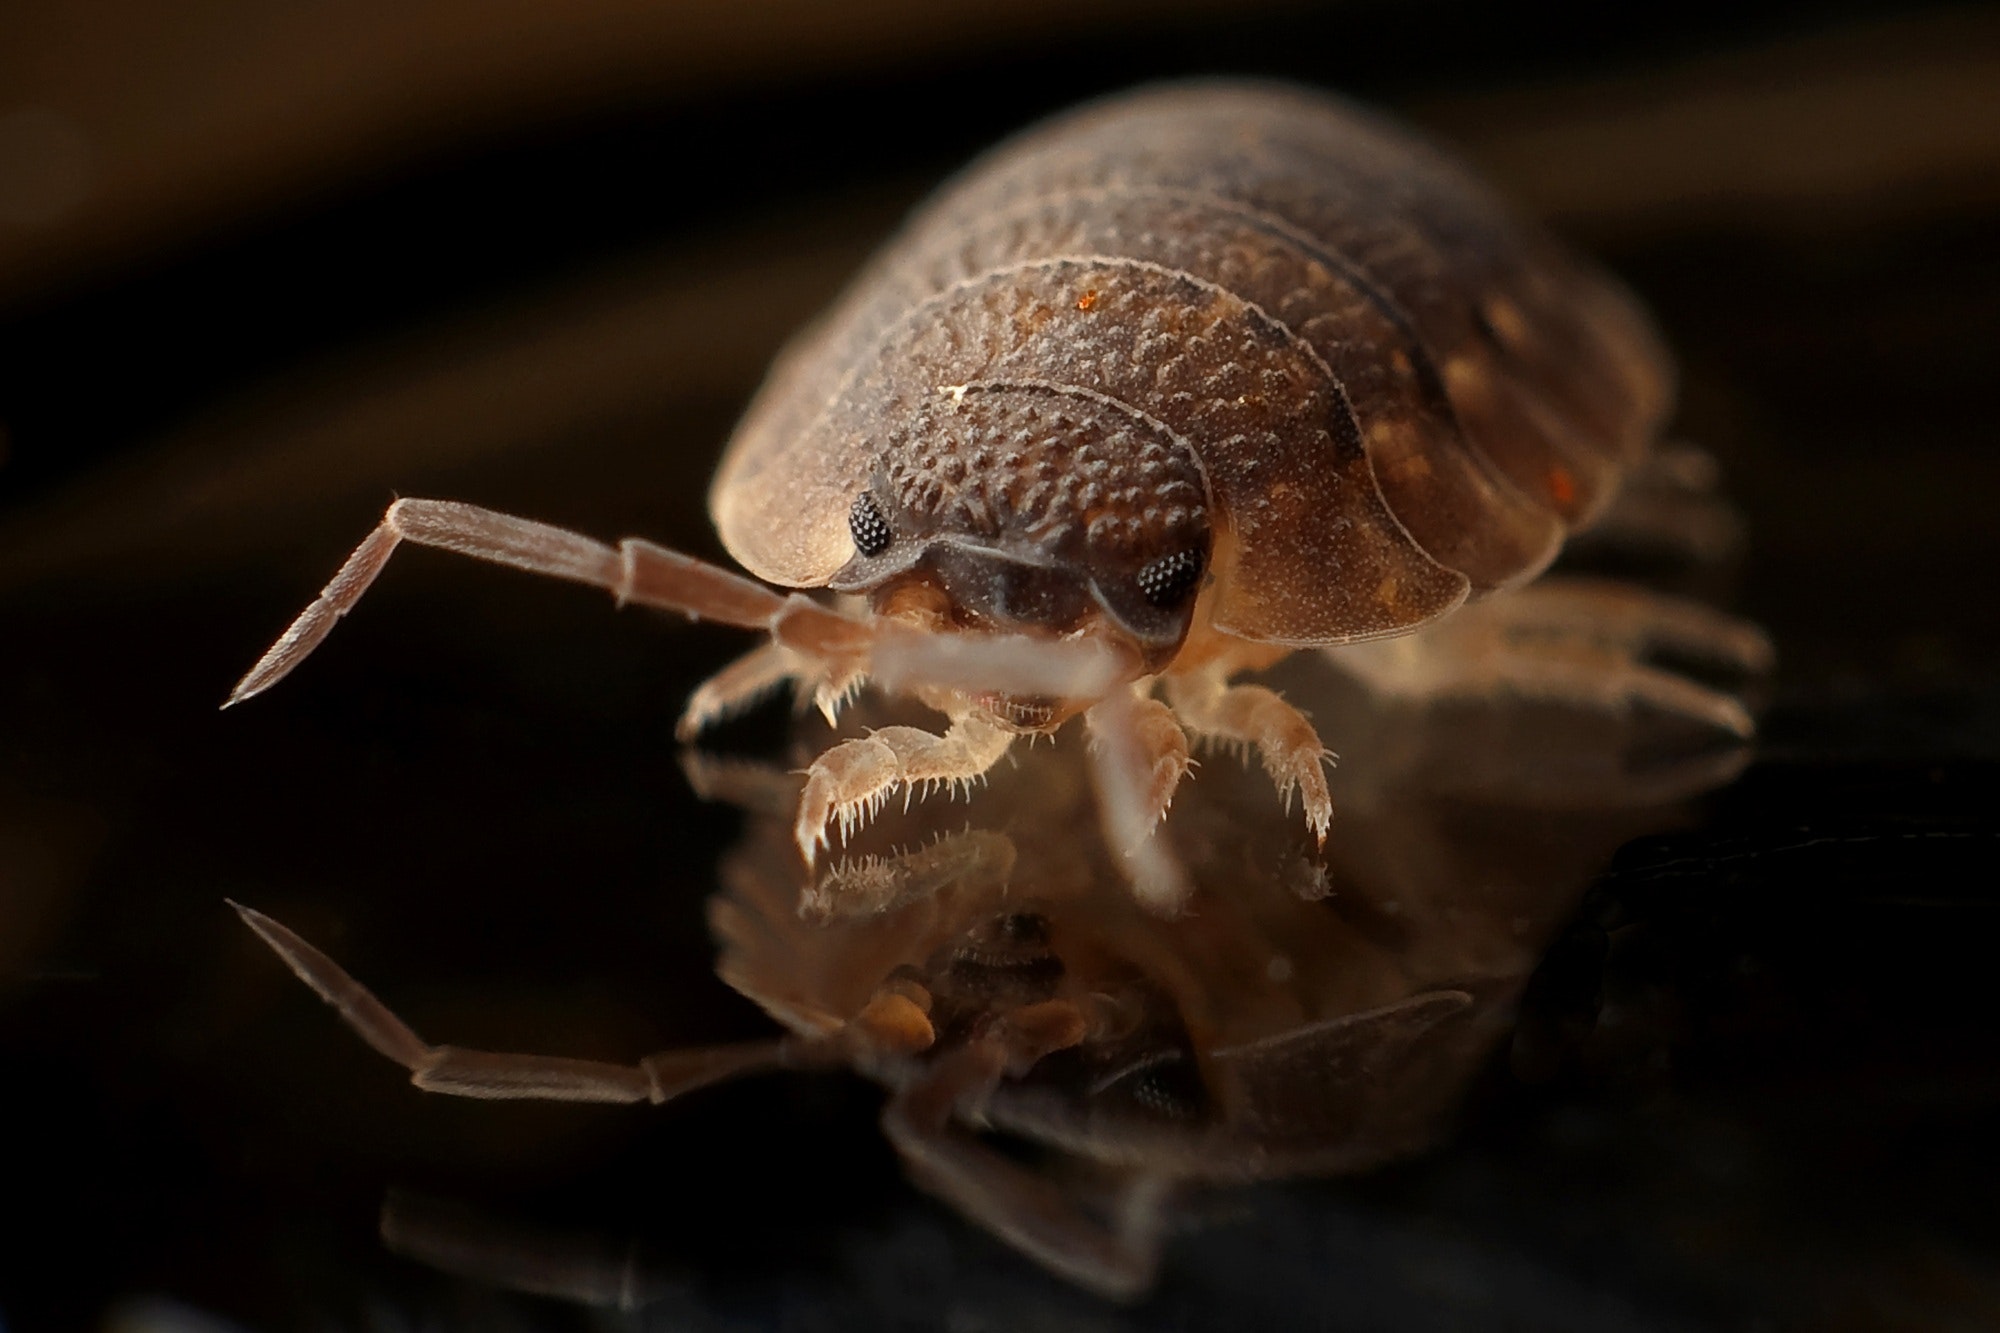 Can I Bring Bed Bugs Into My Home From an Infested Hotel?